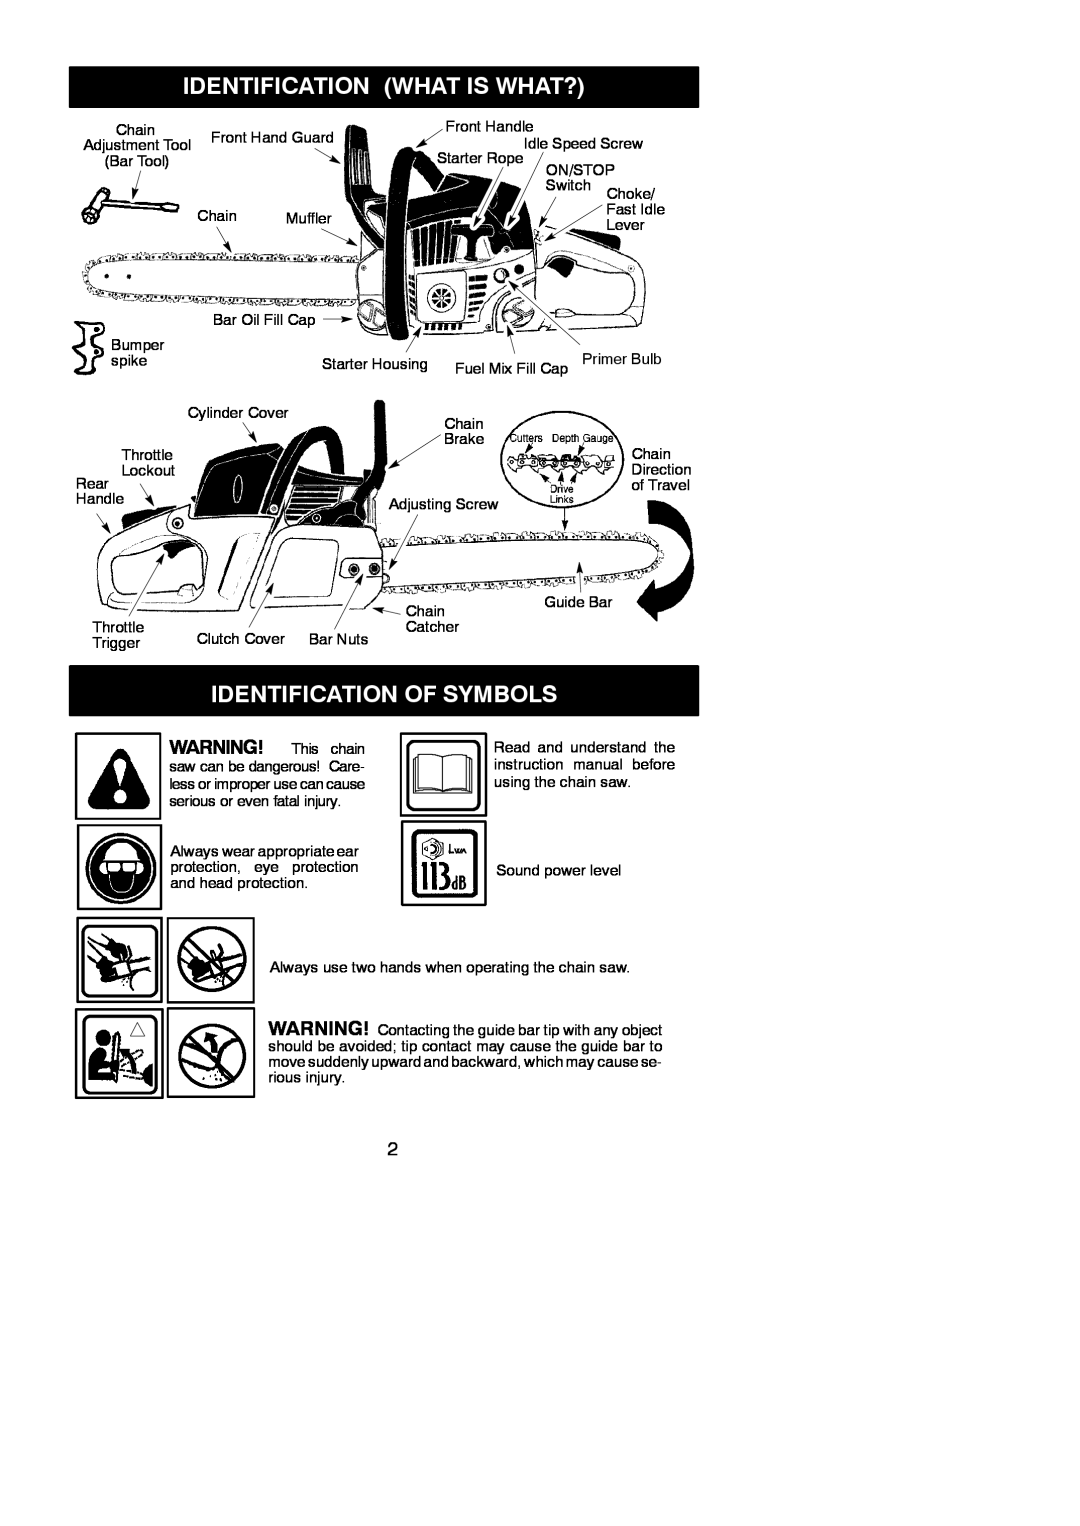 McCulloch MAC 838 instruction manual Identification What Is What?, Identification Of Symbols 